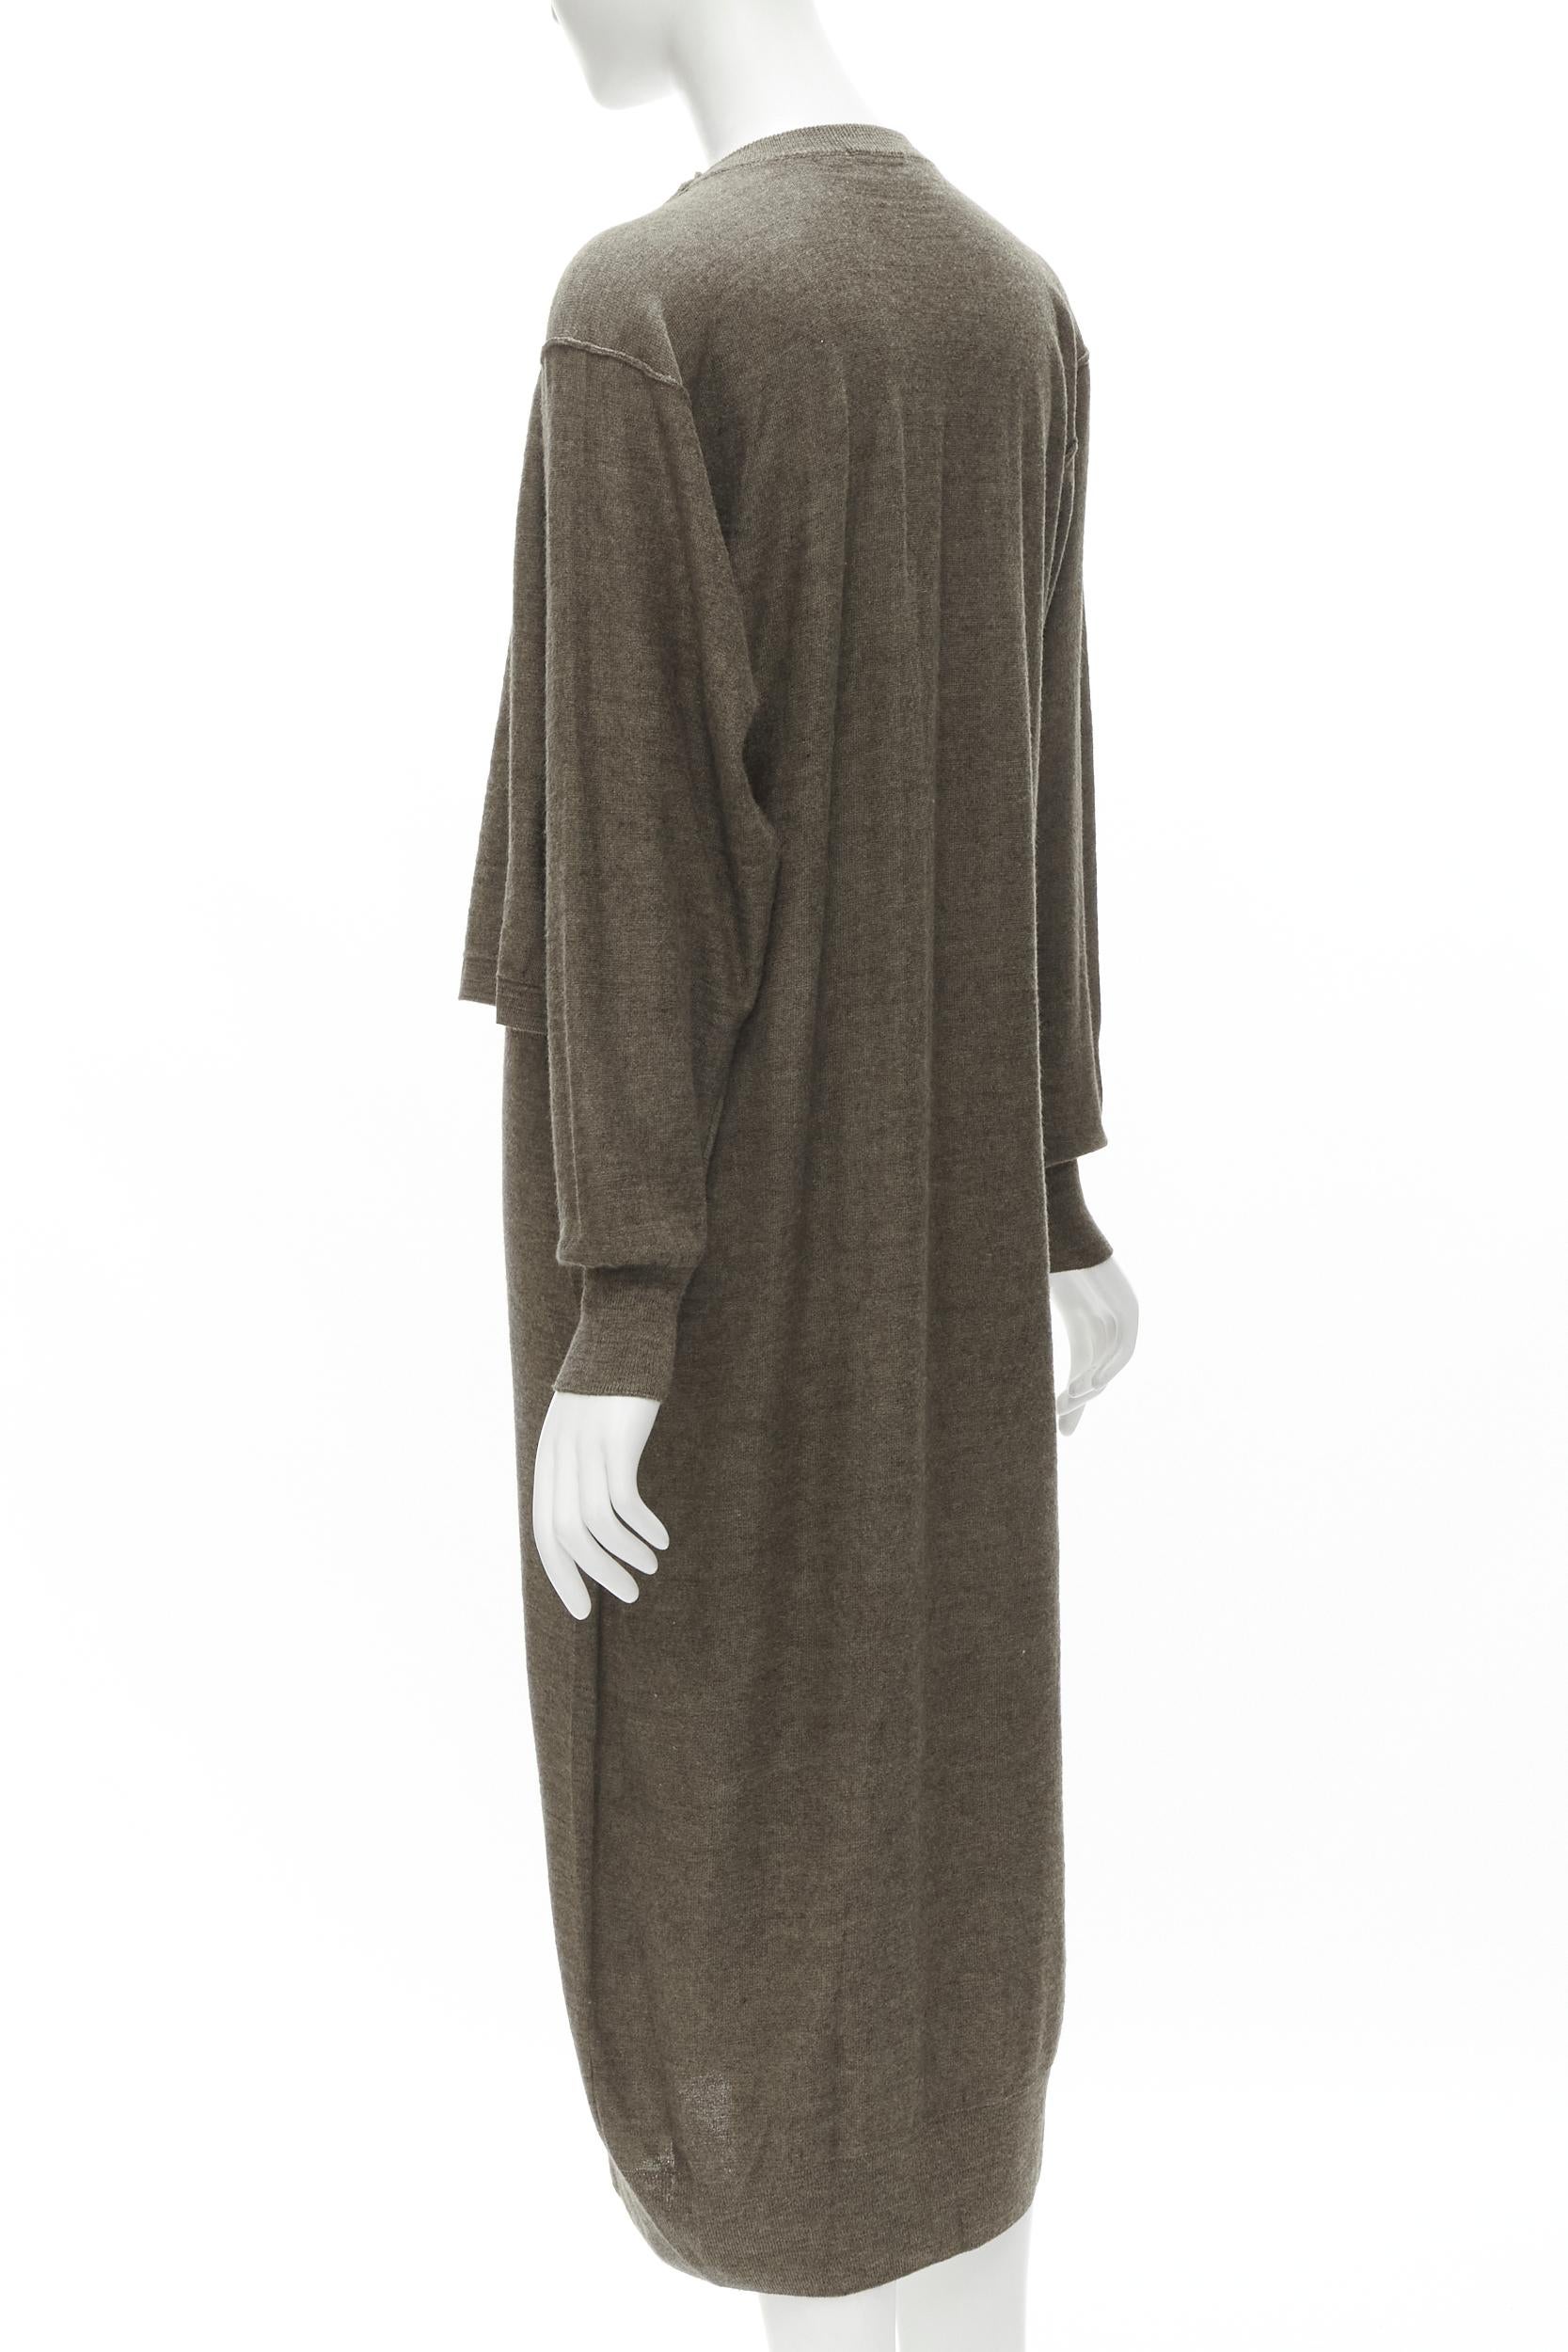 LEMAIRE brown merino wool blend tie front cardigan sweater dress XS For Sale 1